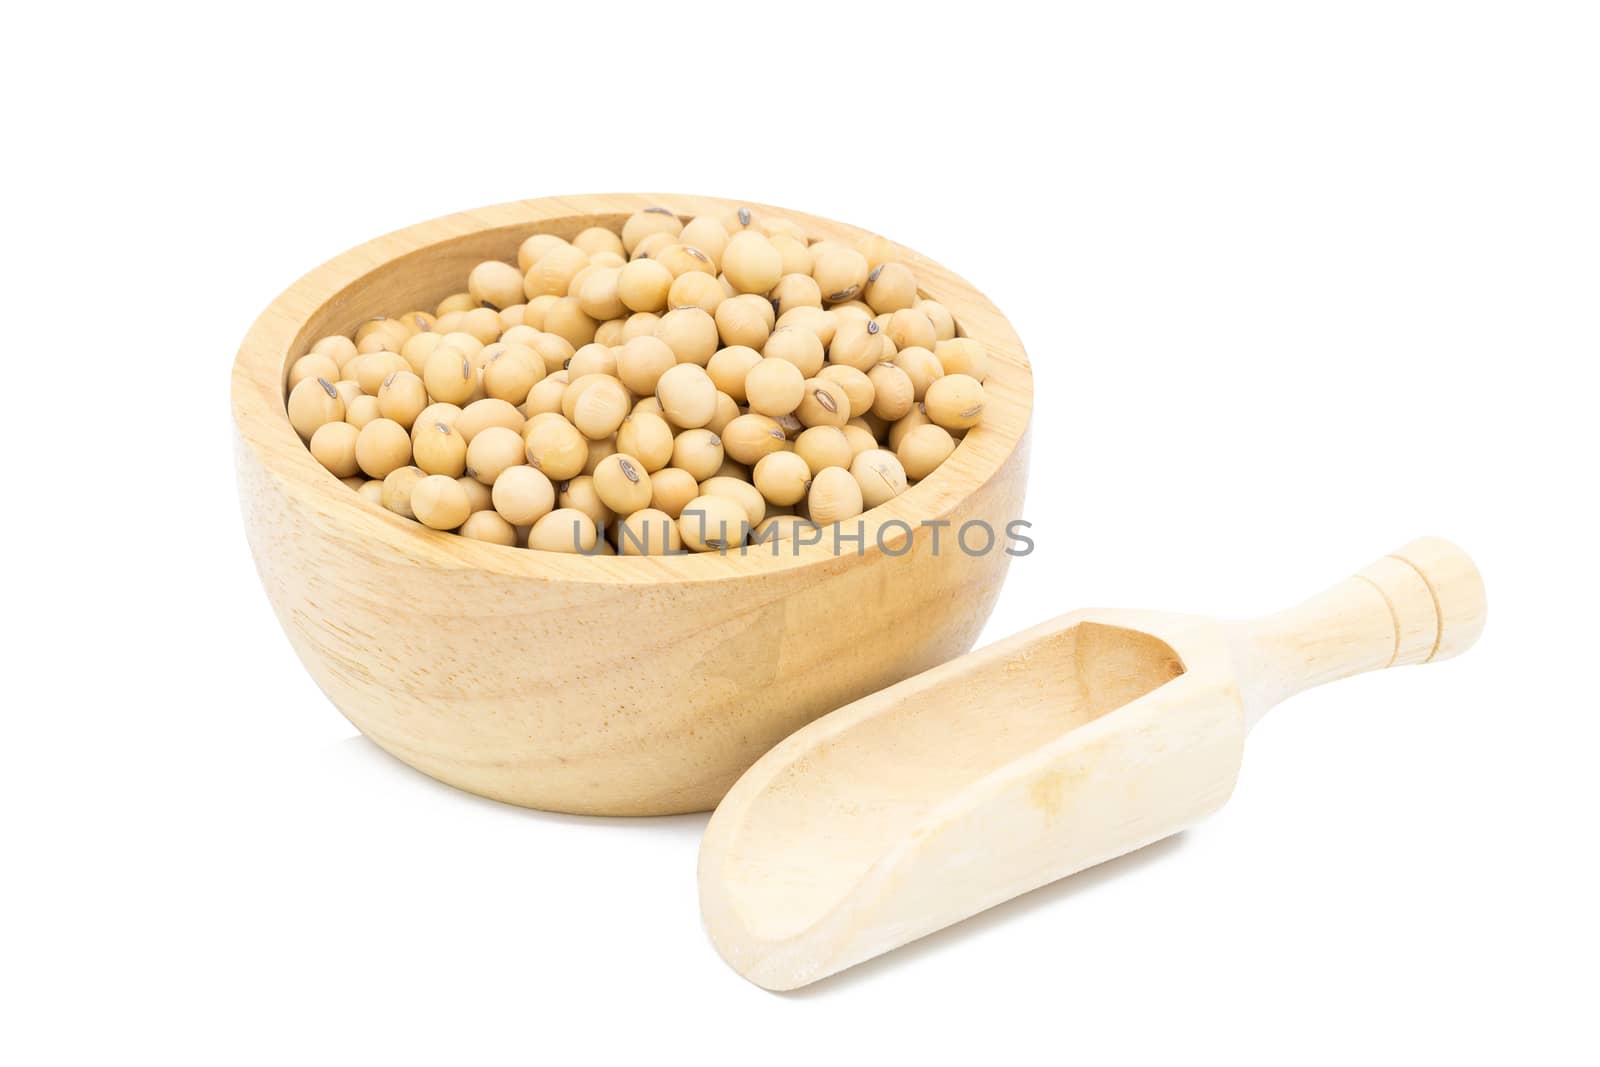 Soybeans in a wooden bowl with wooden spoon on a white background.